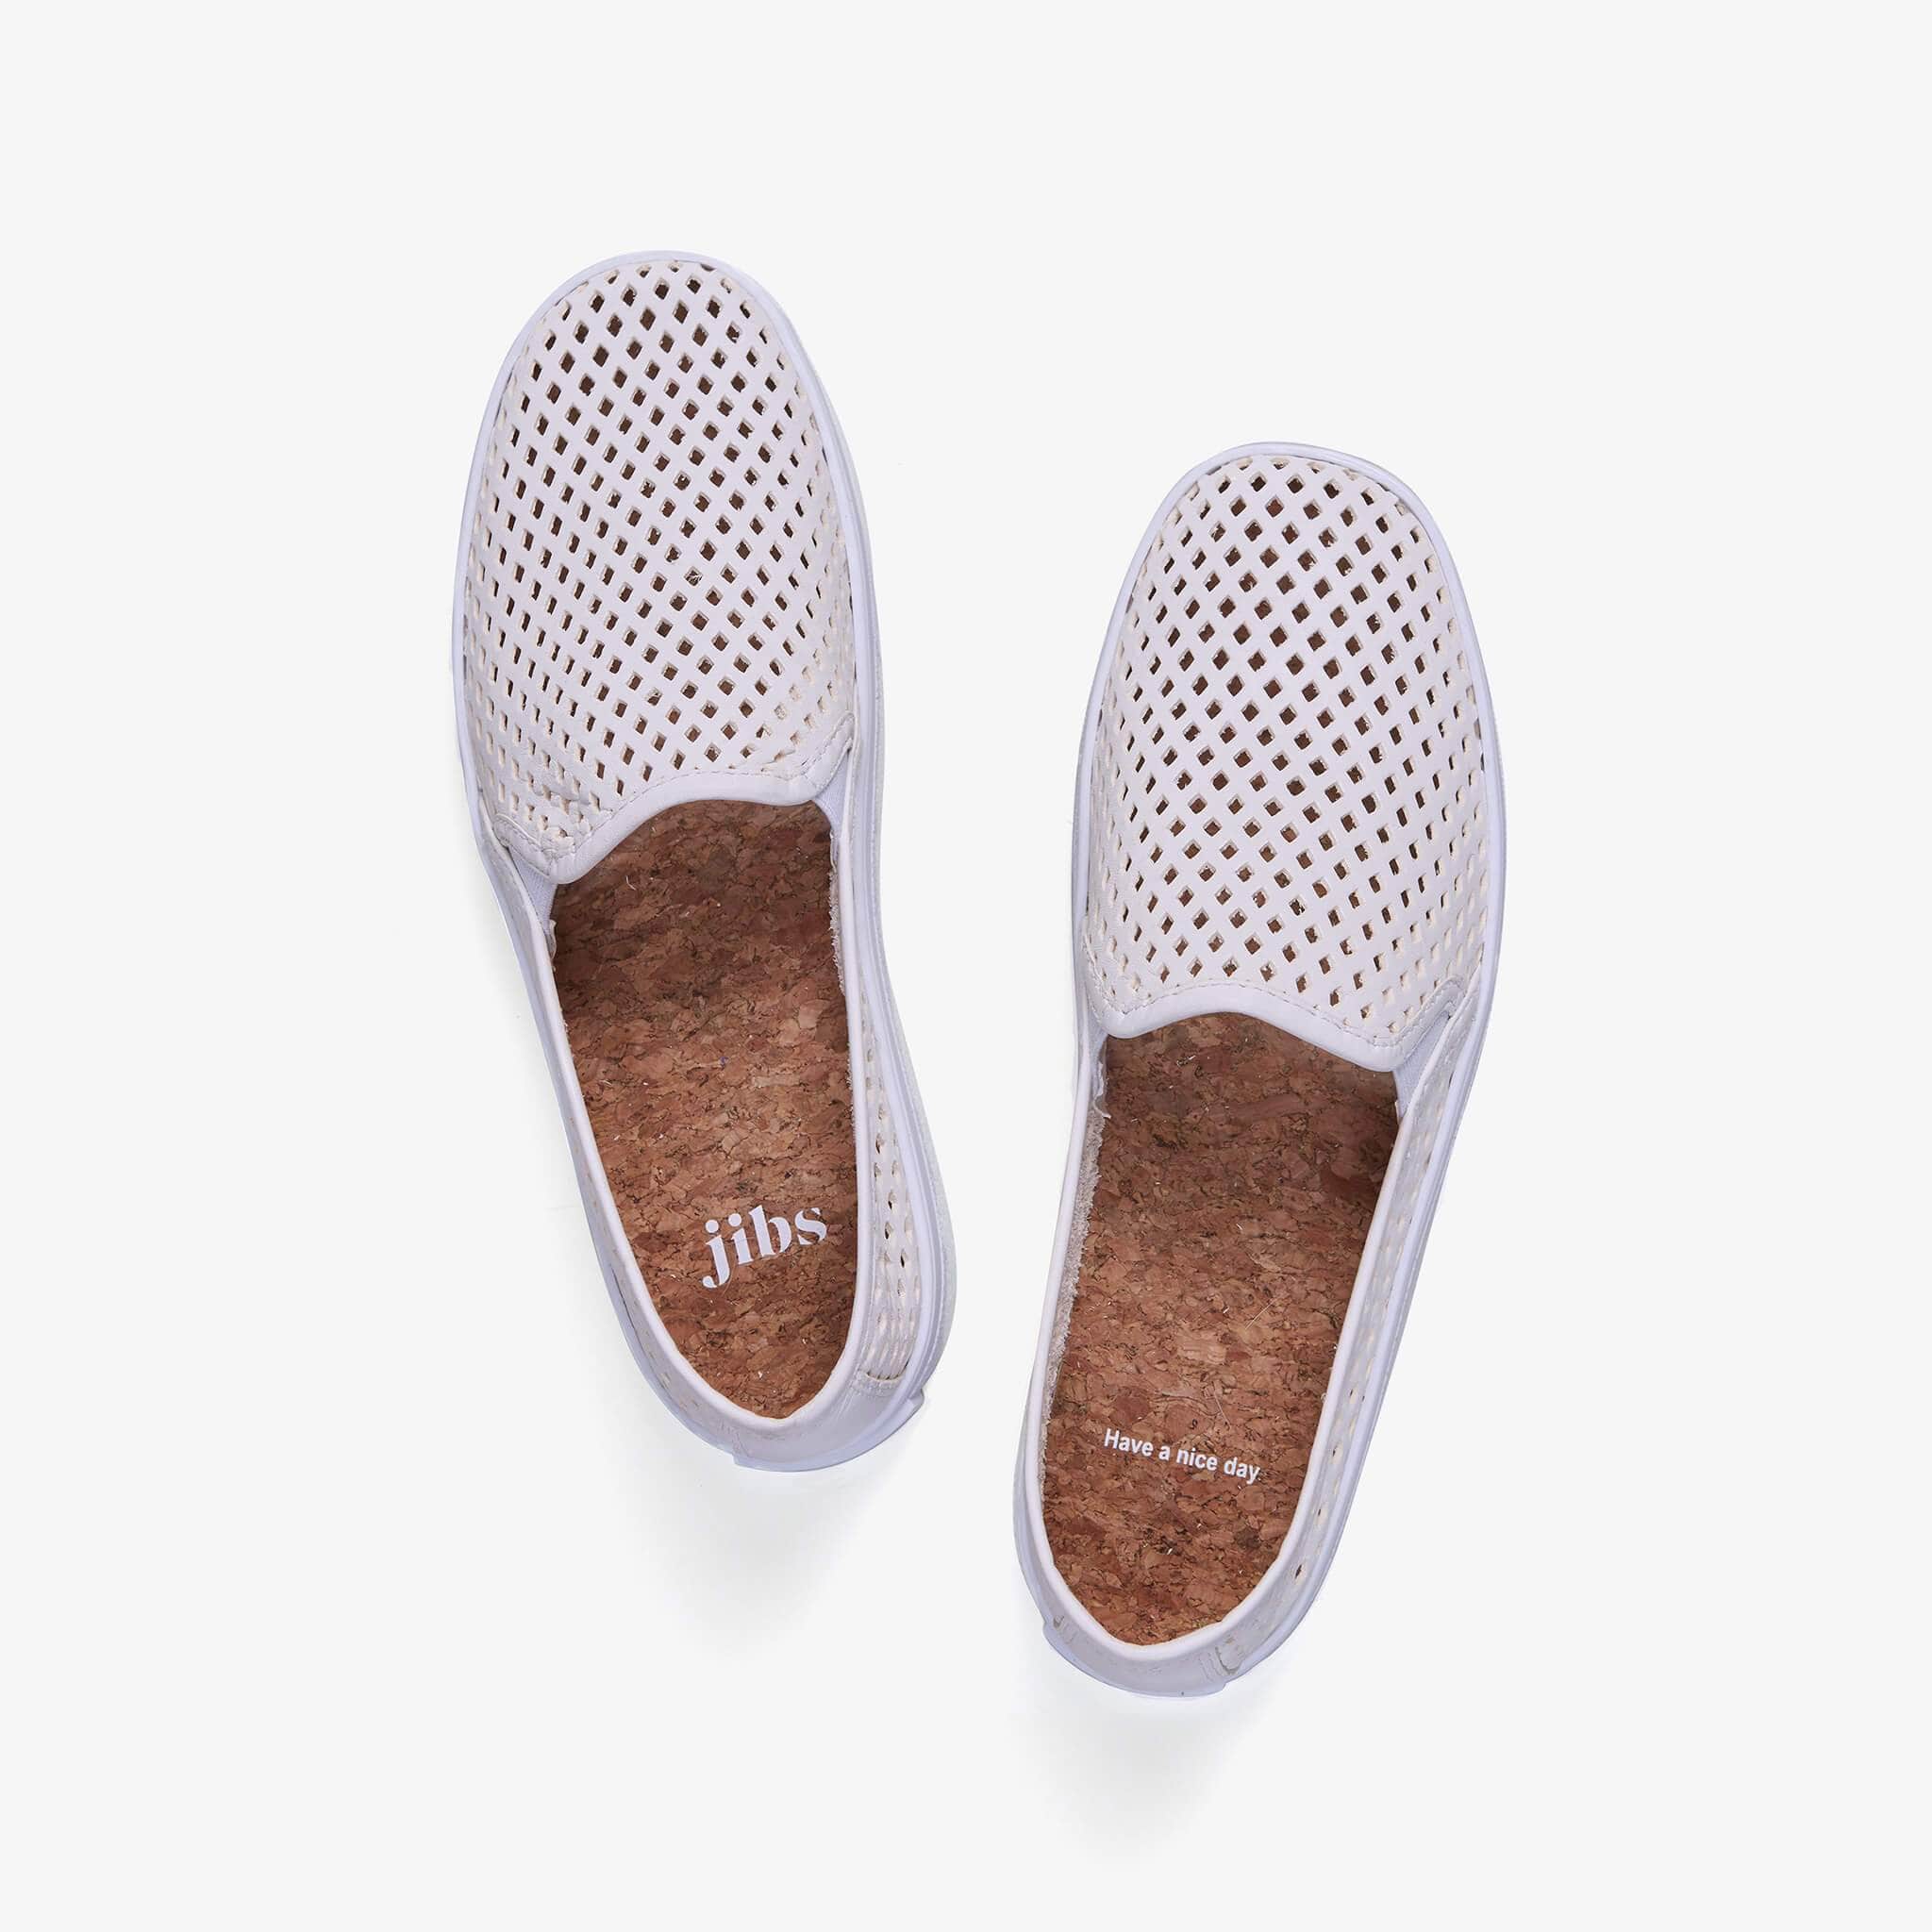 JIbs Classic Soft White Slip On Sneaker-Shoe Top Have A Nice Day